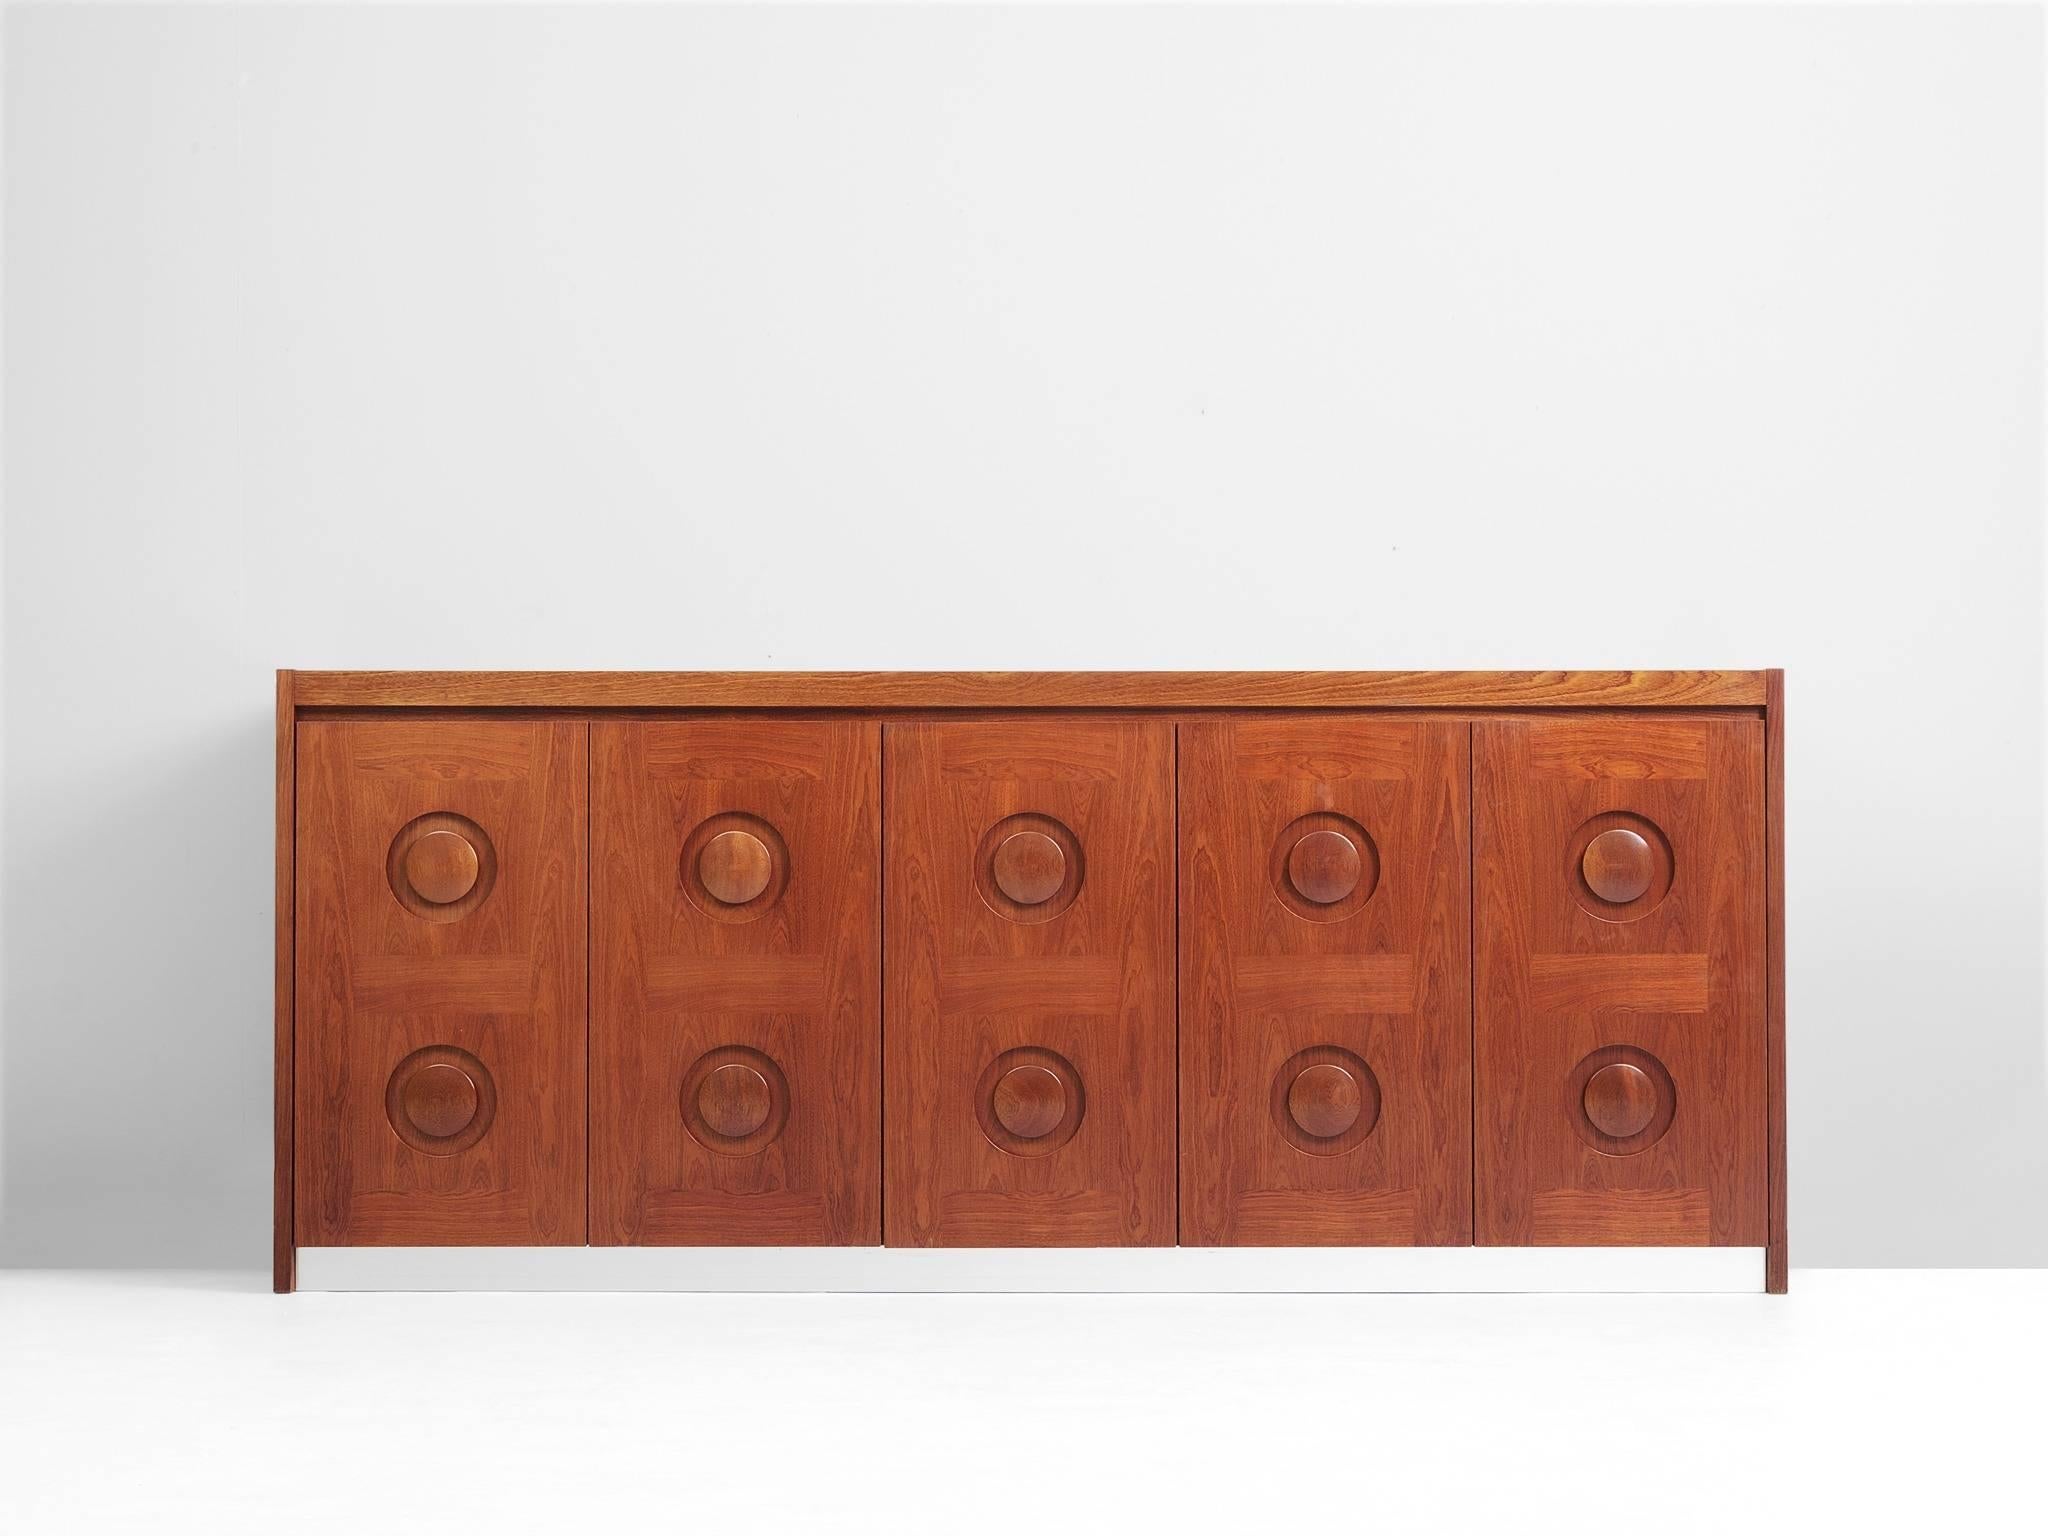 Brown Brutalist credenza in mahogany and aluminum, European, 1970s. 

Sturdy credenza in mahogany with graphical designed door panels. Five-door panels, each with a three-dimensional pattern of circles horizontal lines, which gives the cabinet a